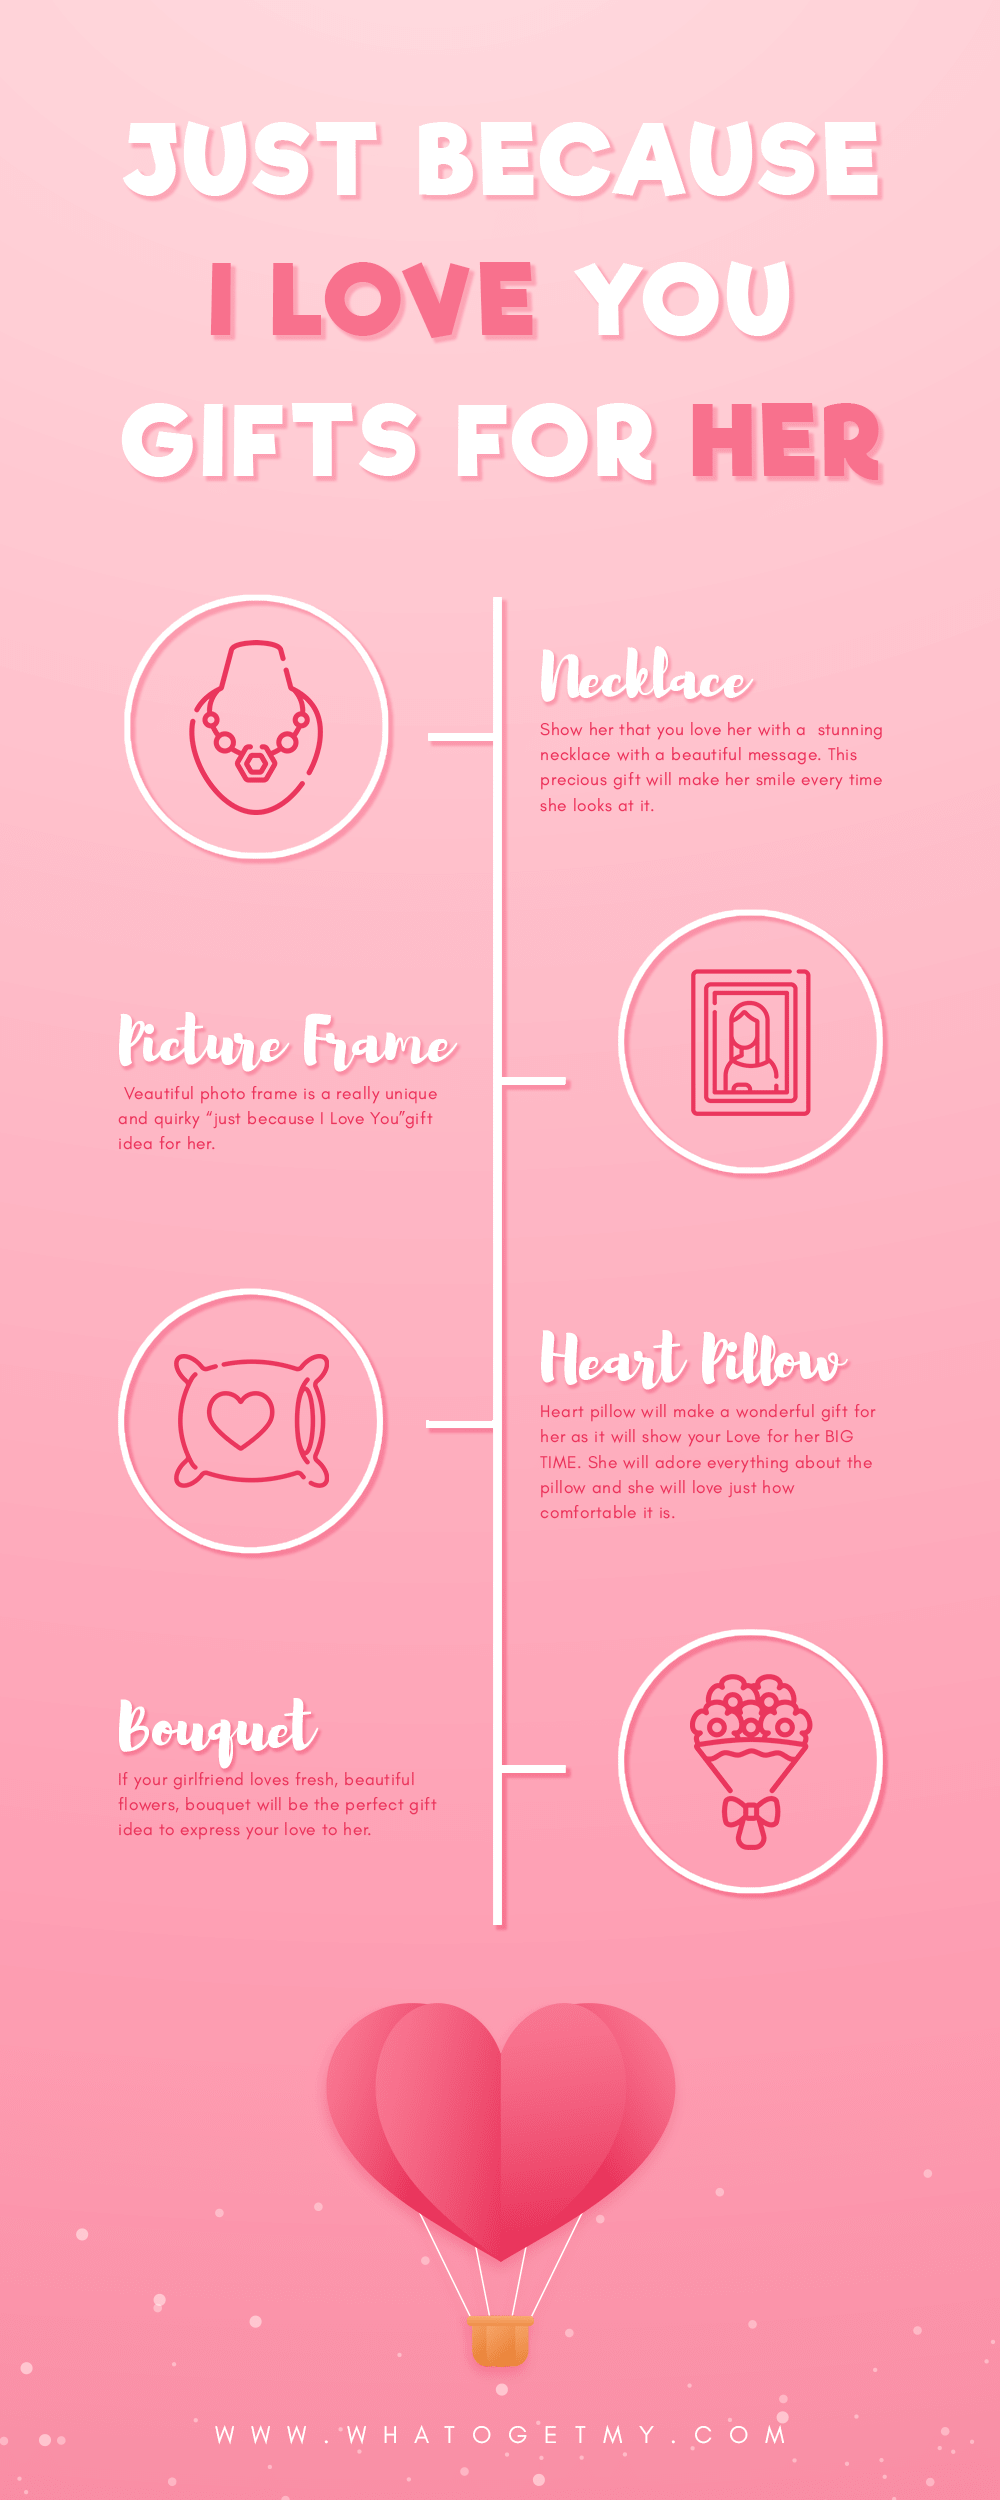 Infographic Just Because I Love You Gifts For Her